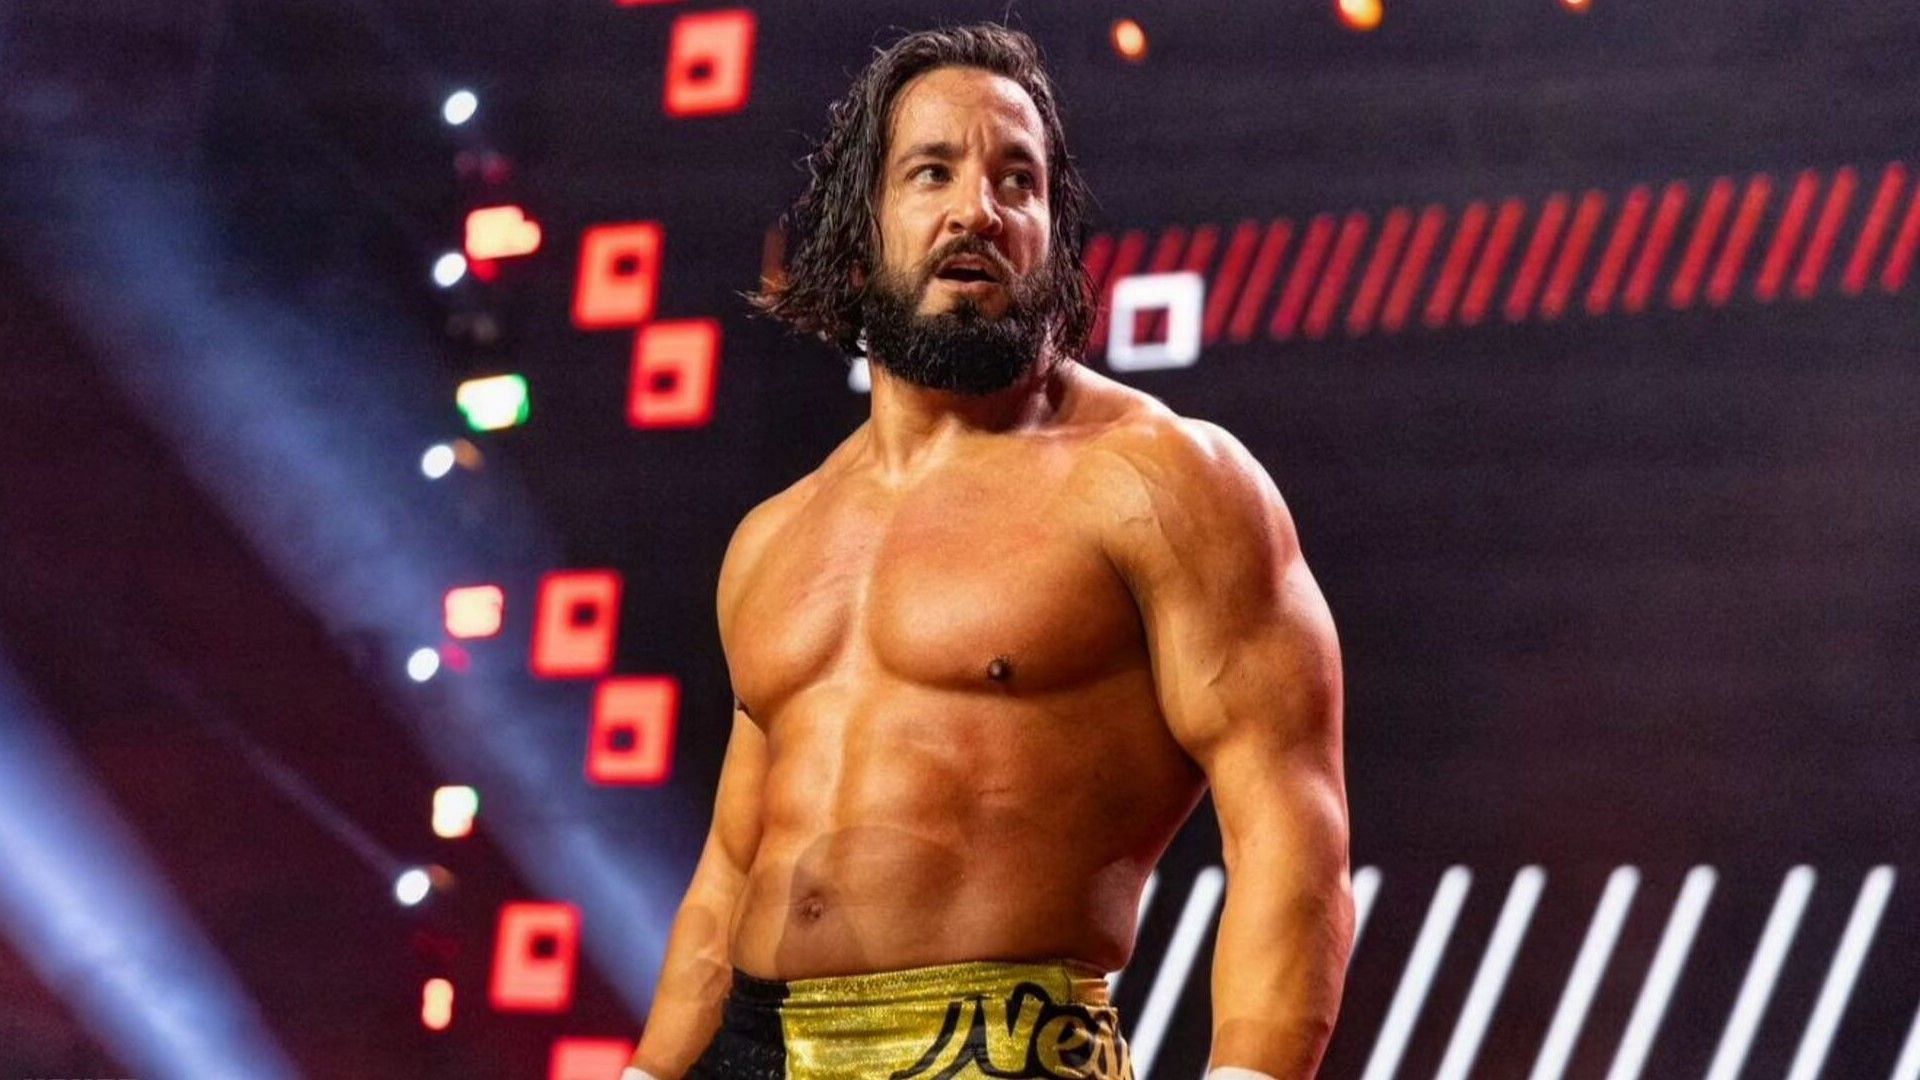 AEW and ROH star Tony Nese heads to the ring